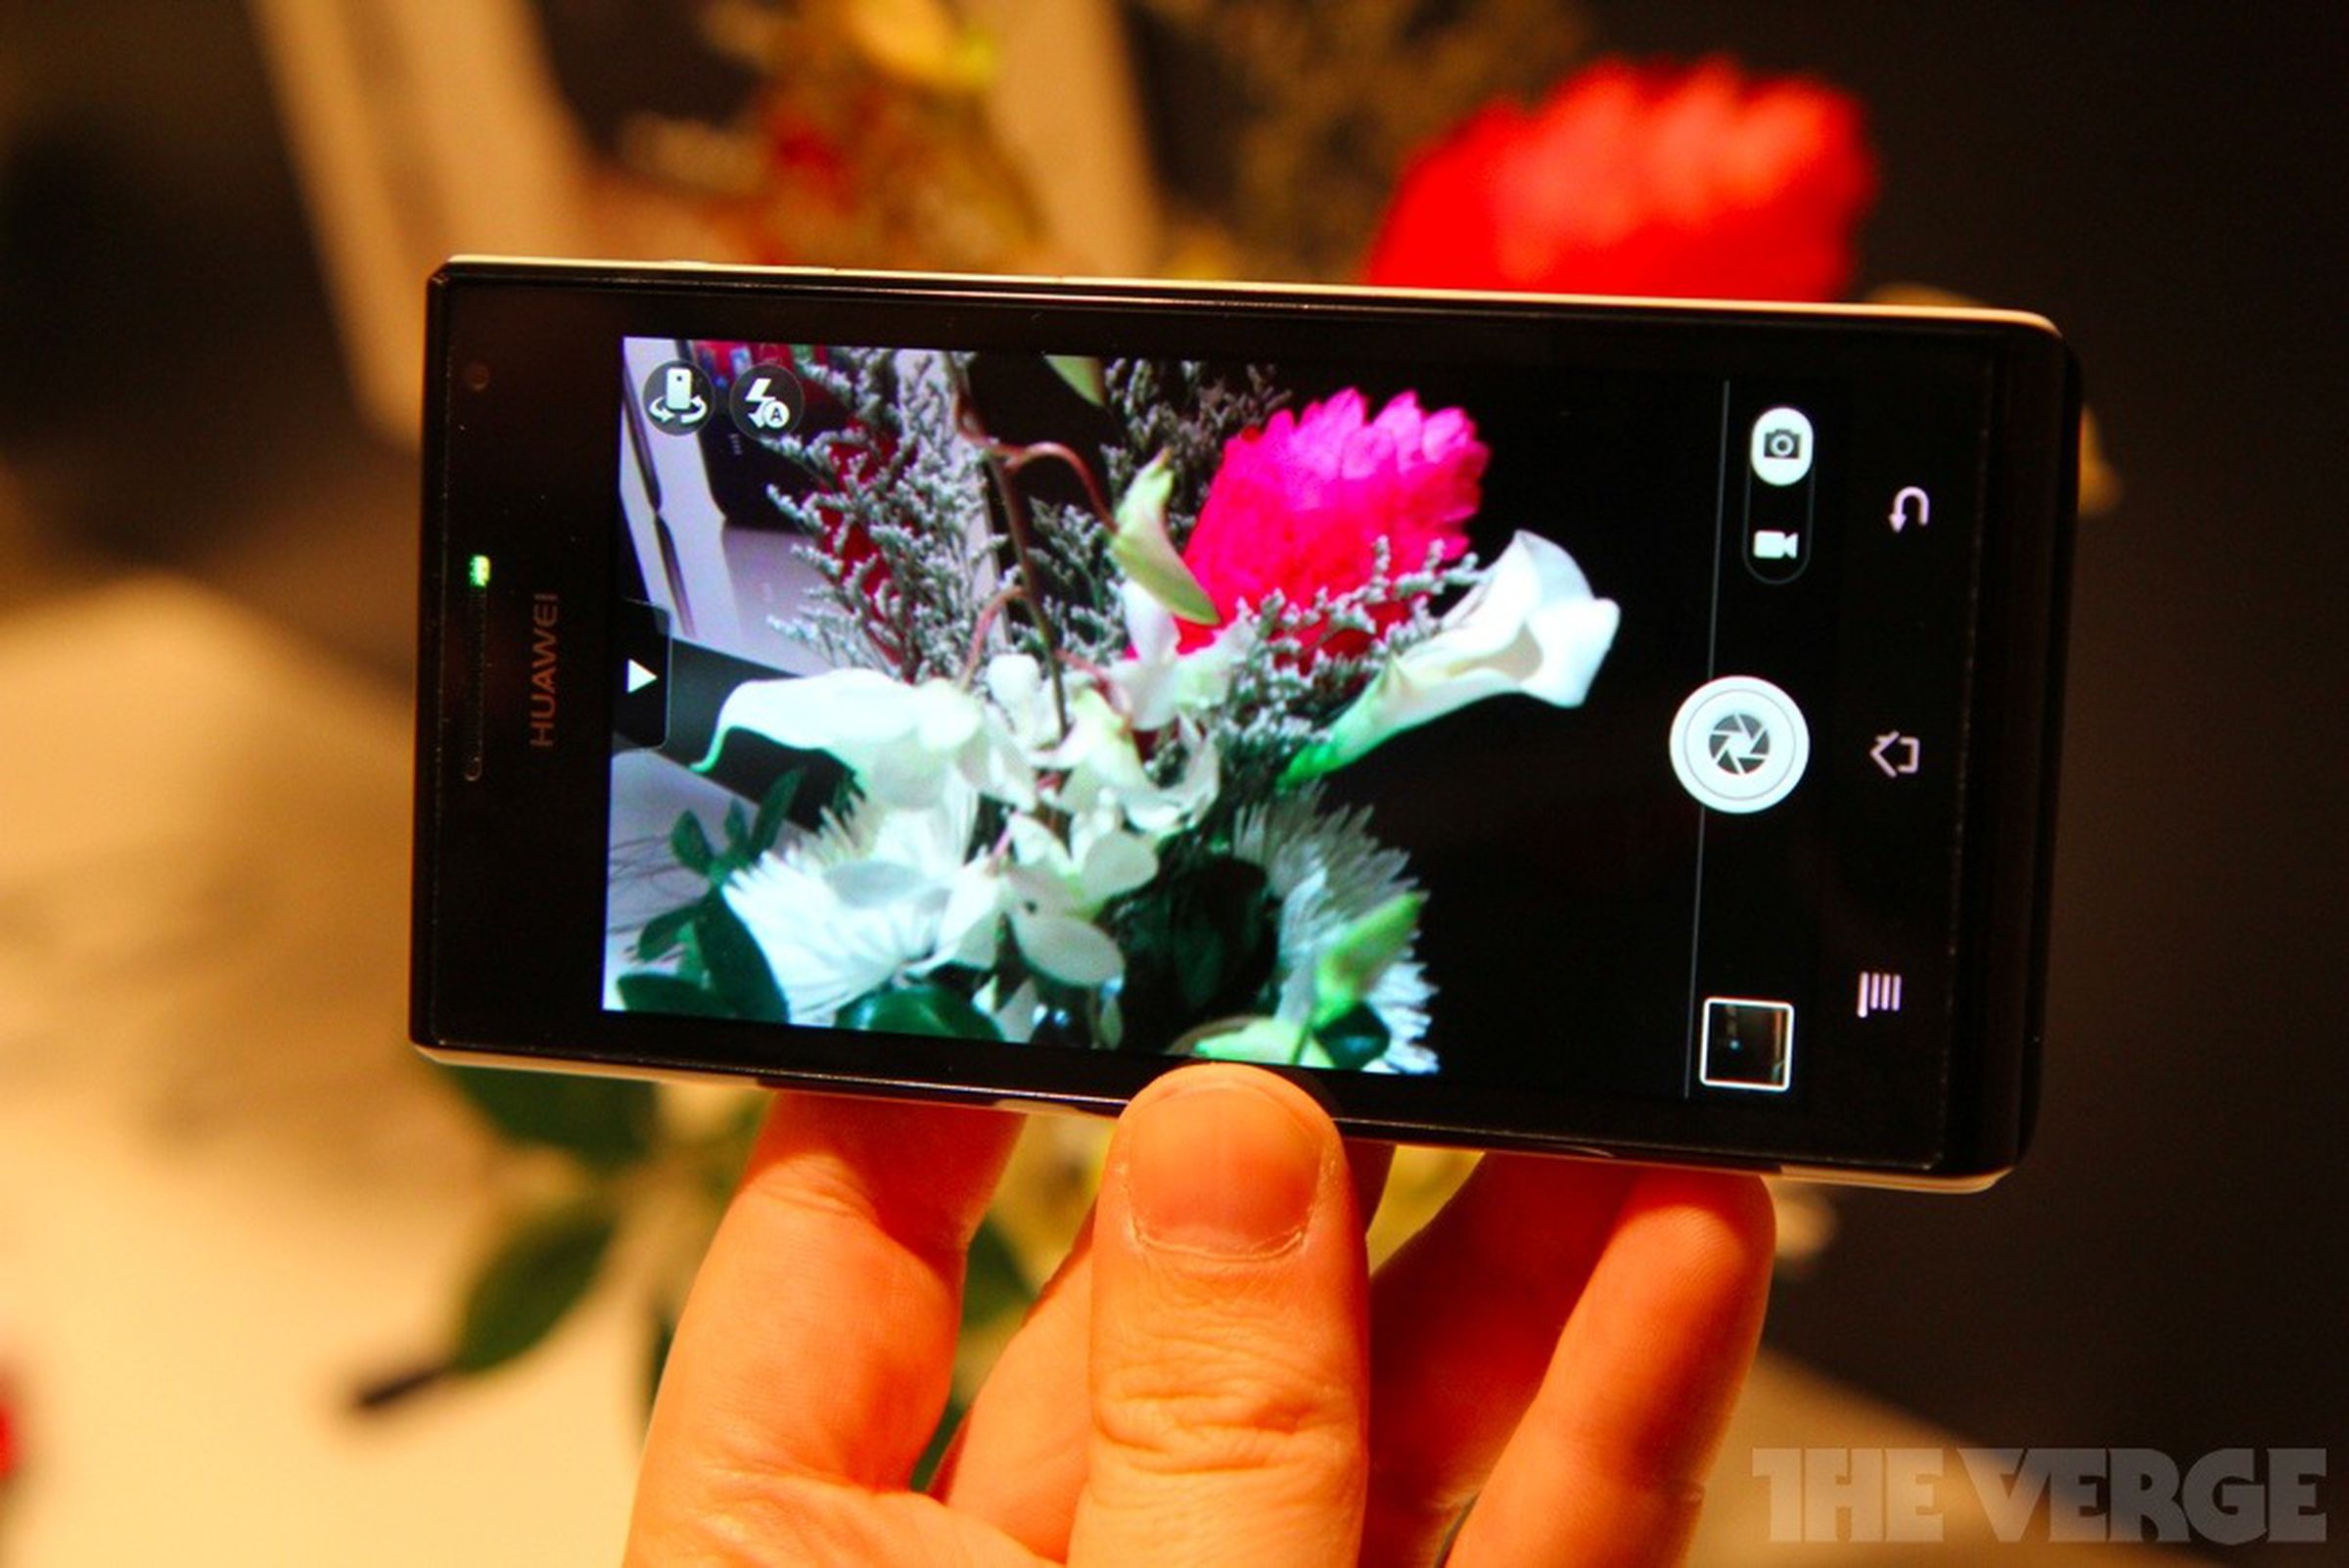 Huawei Ascend P1 / P1 S hands-on pictures